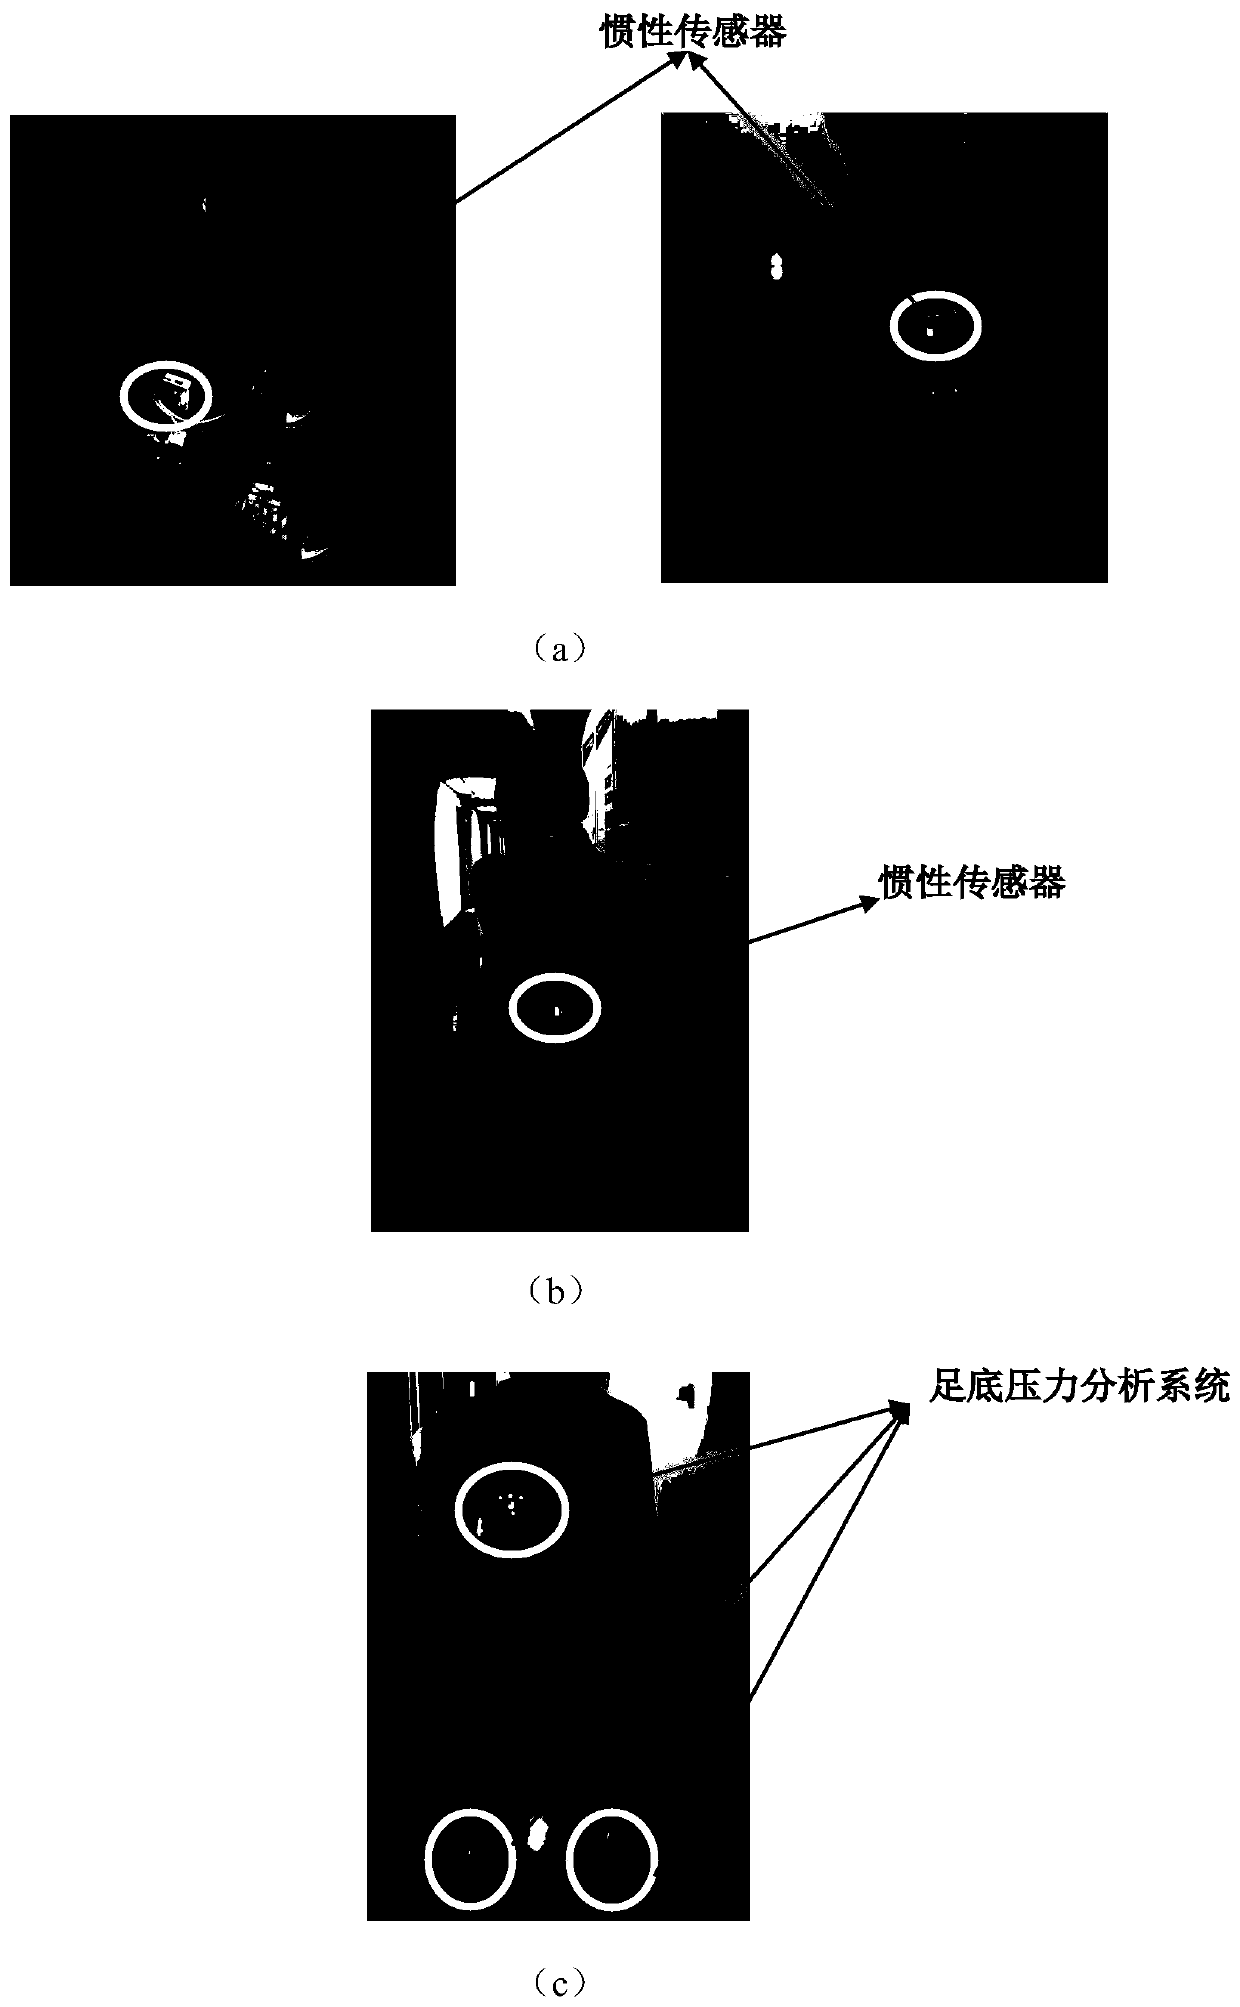 Human motion state discrimination method based on densely connected convolutional neural network